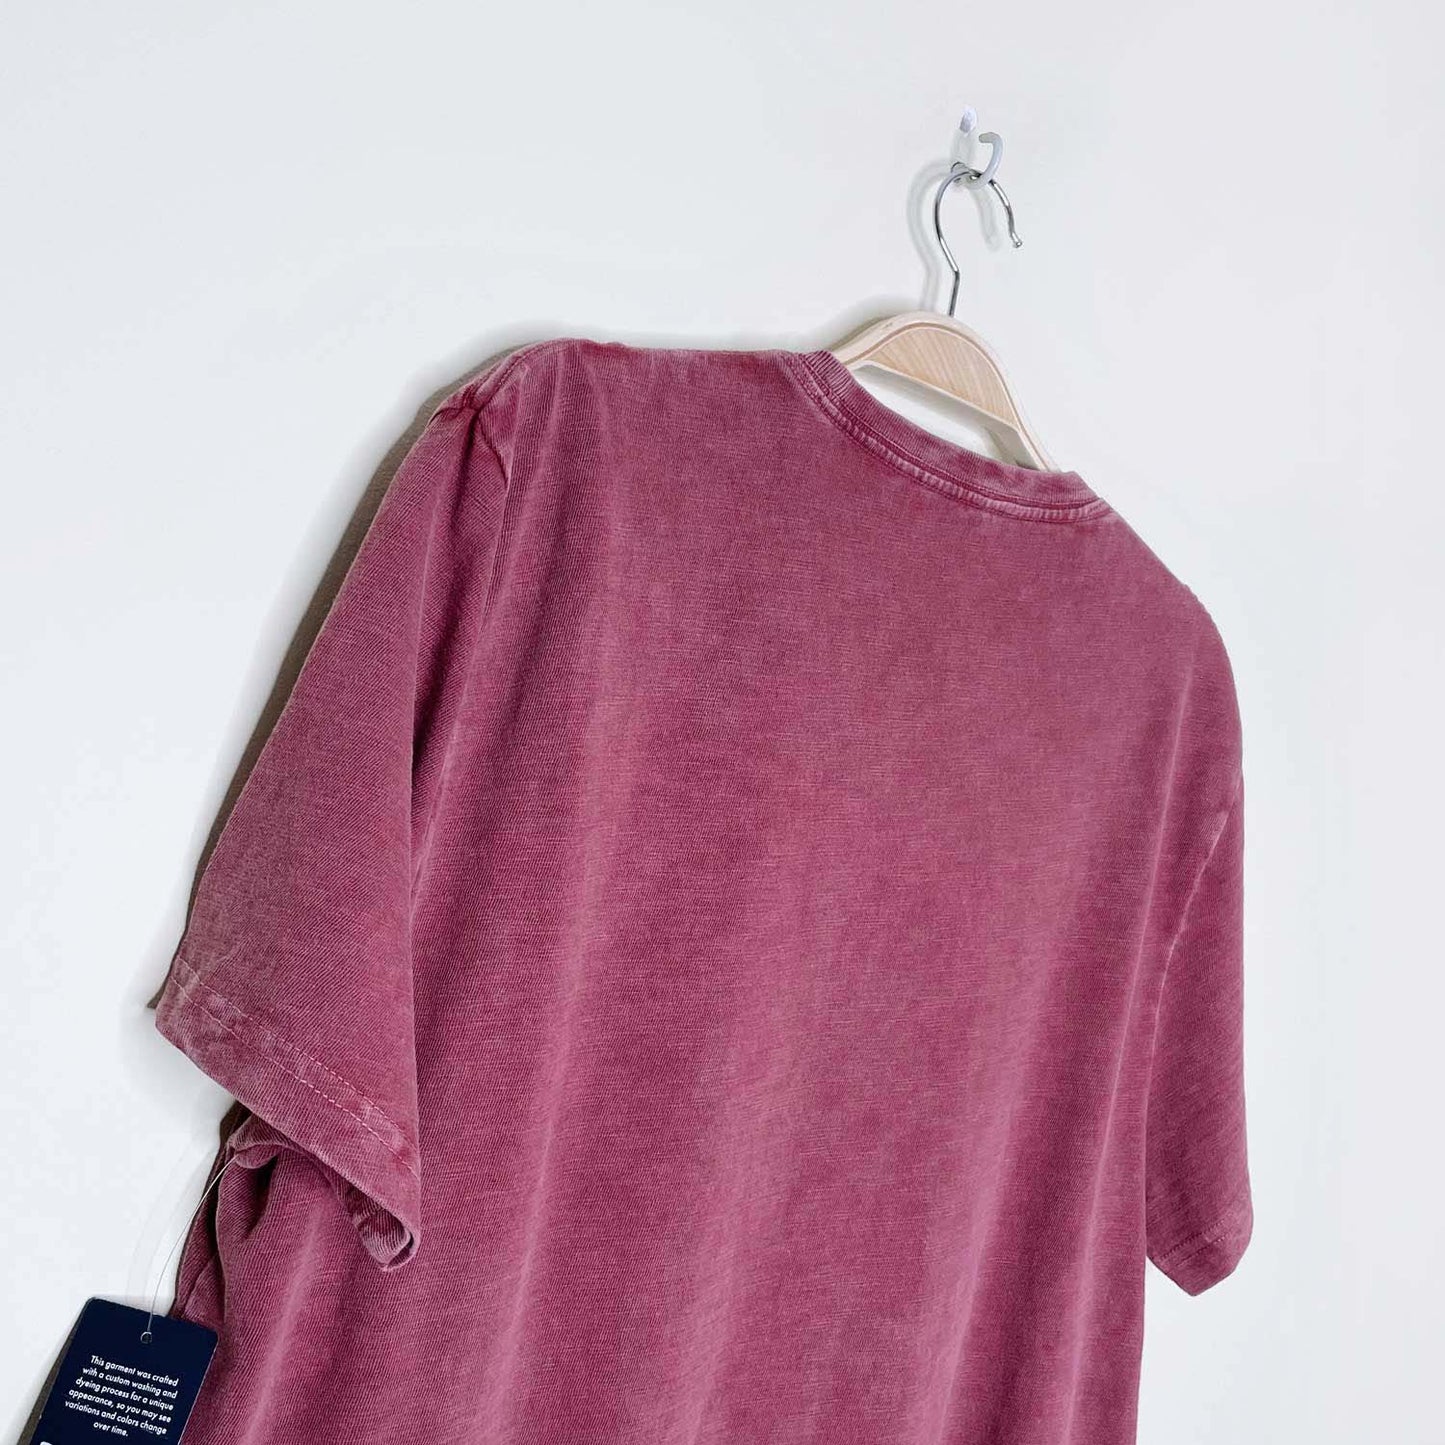 nwt lucky brand hungover for the holidays tee - size large